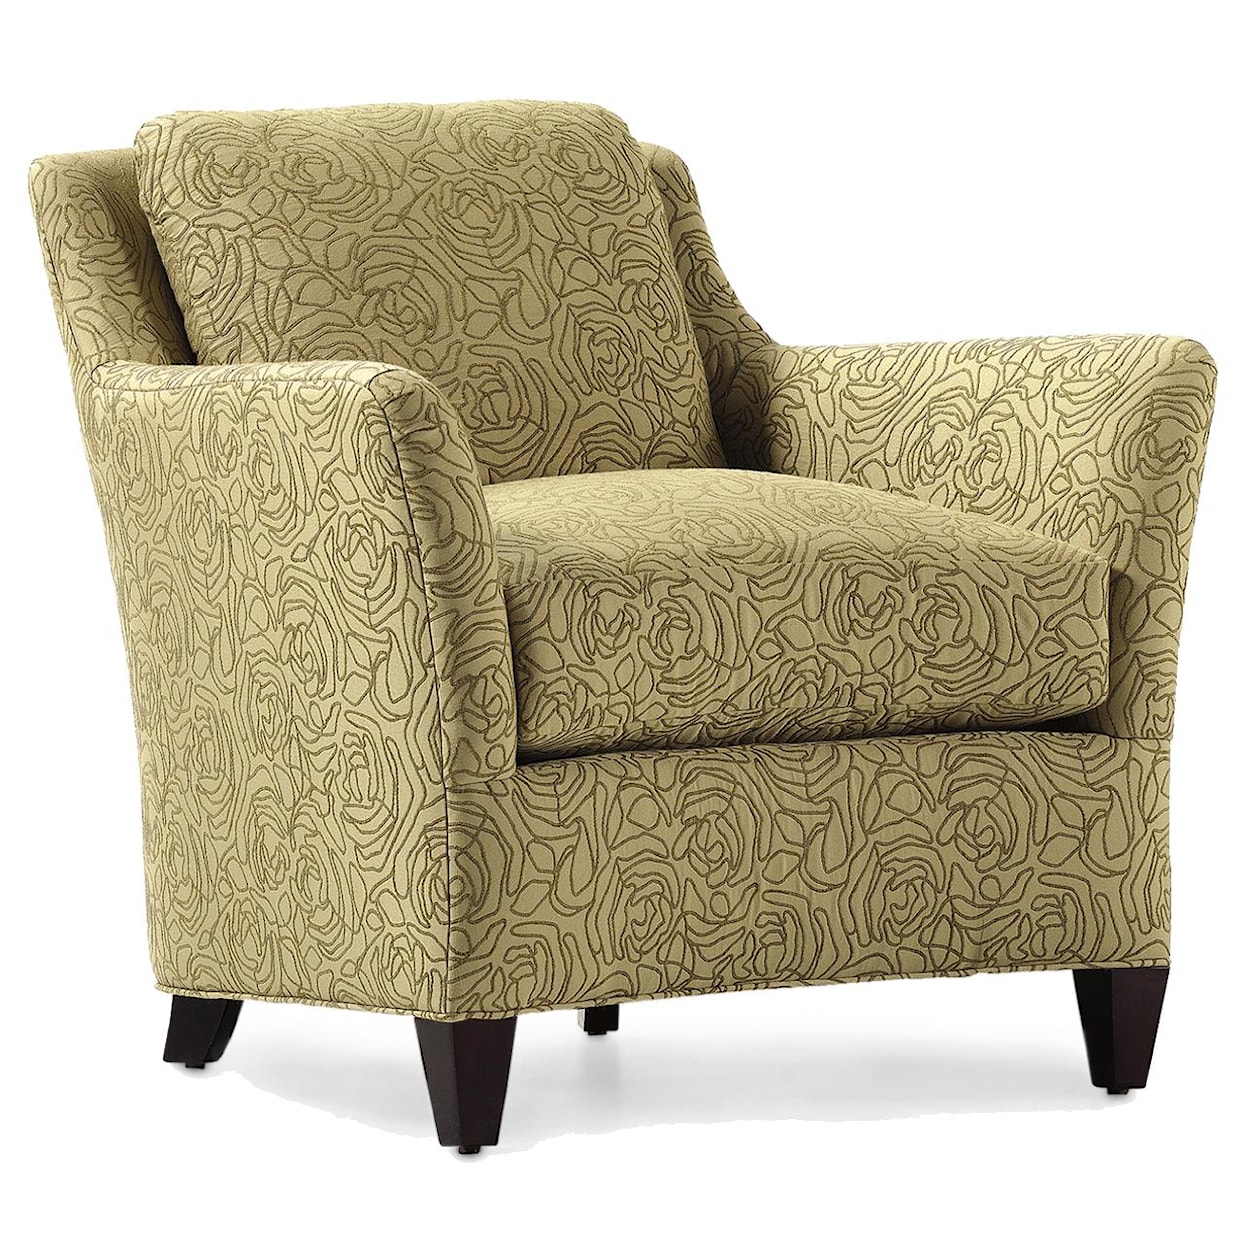 Jessica Charles Fine Upholstered Accents Grayson Chair